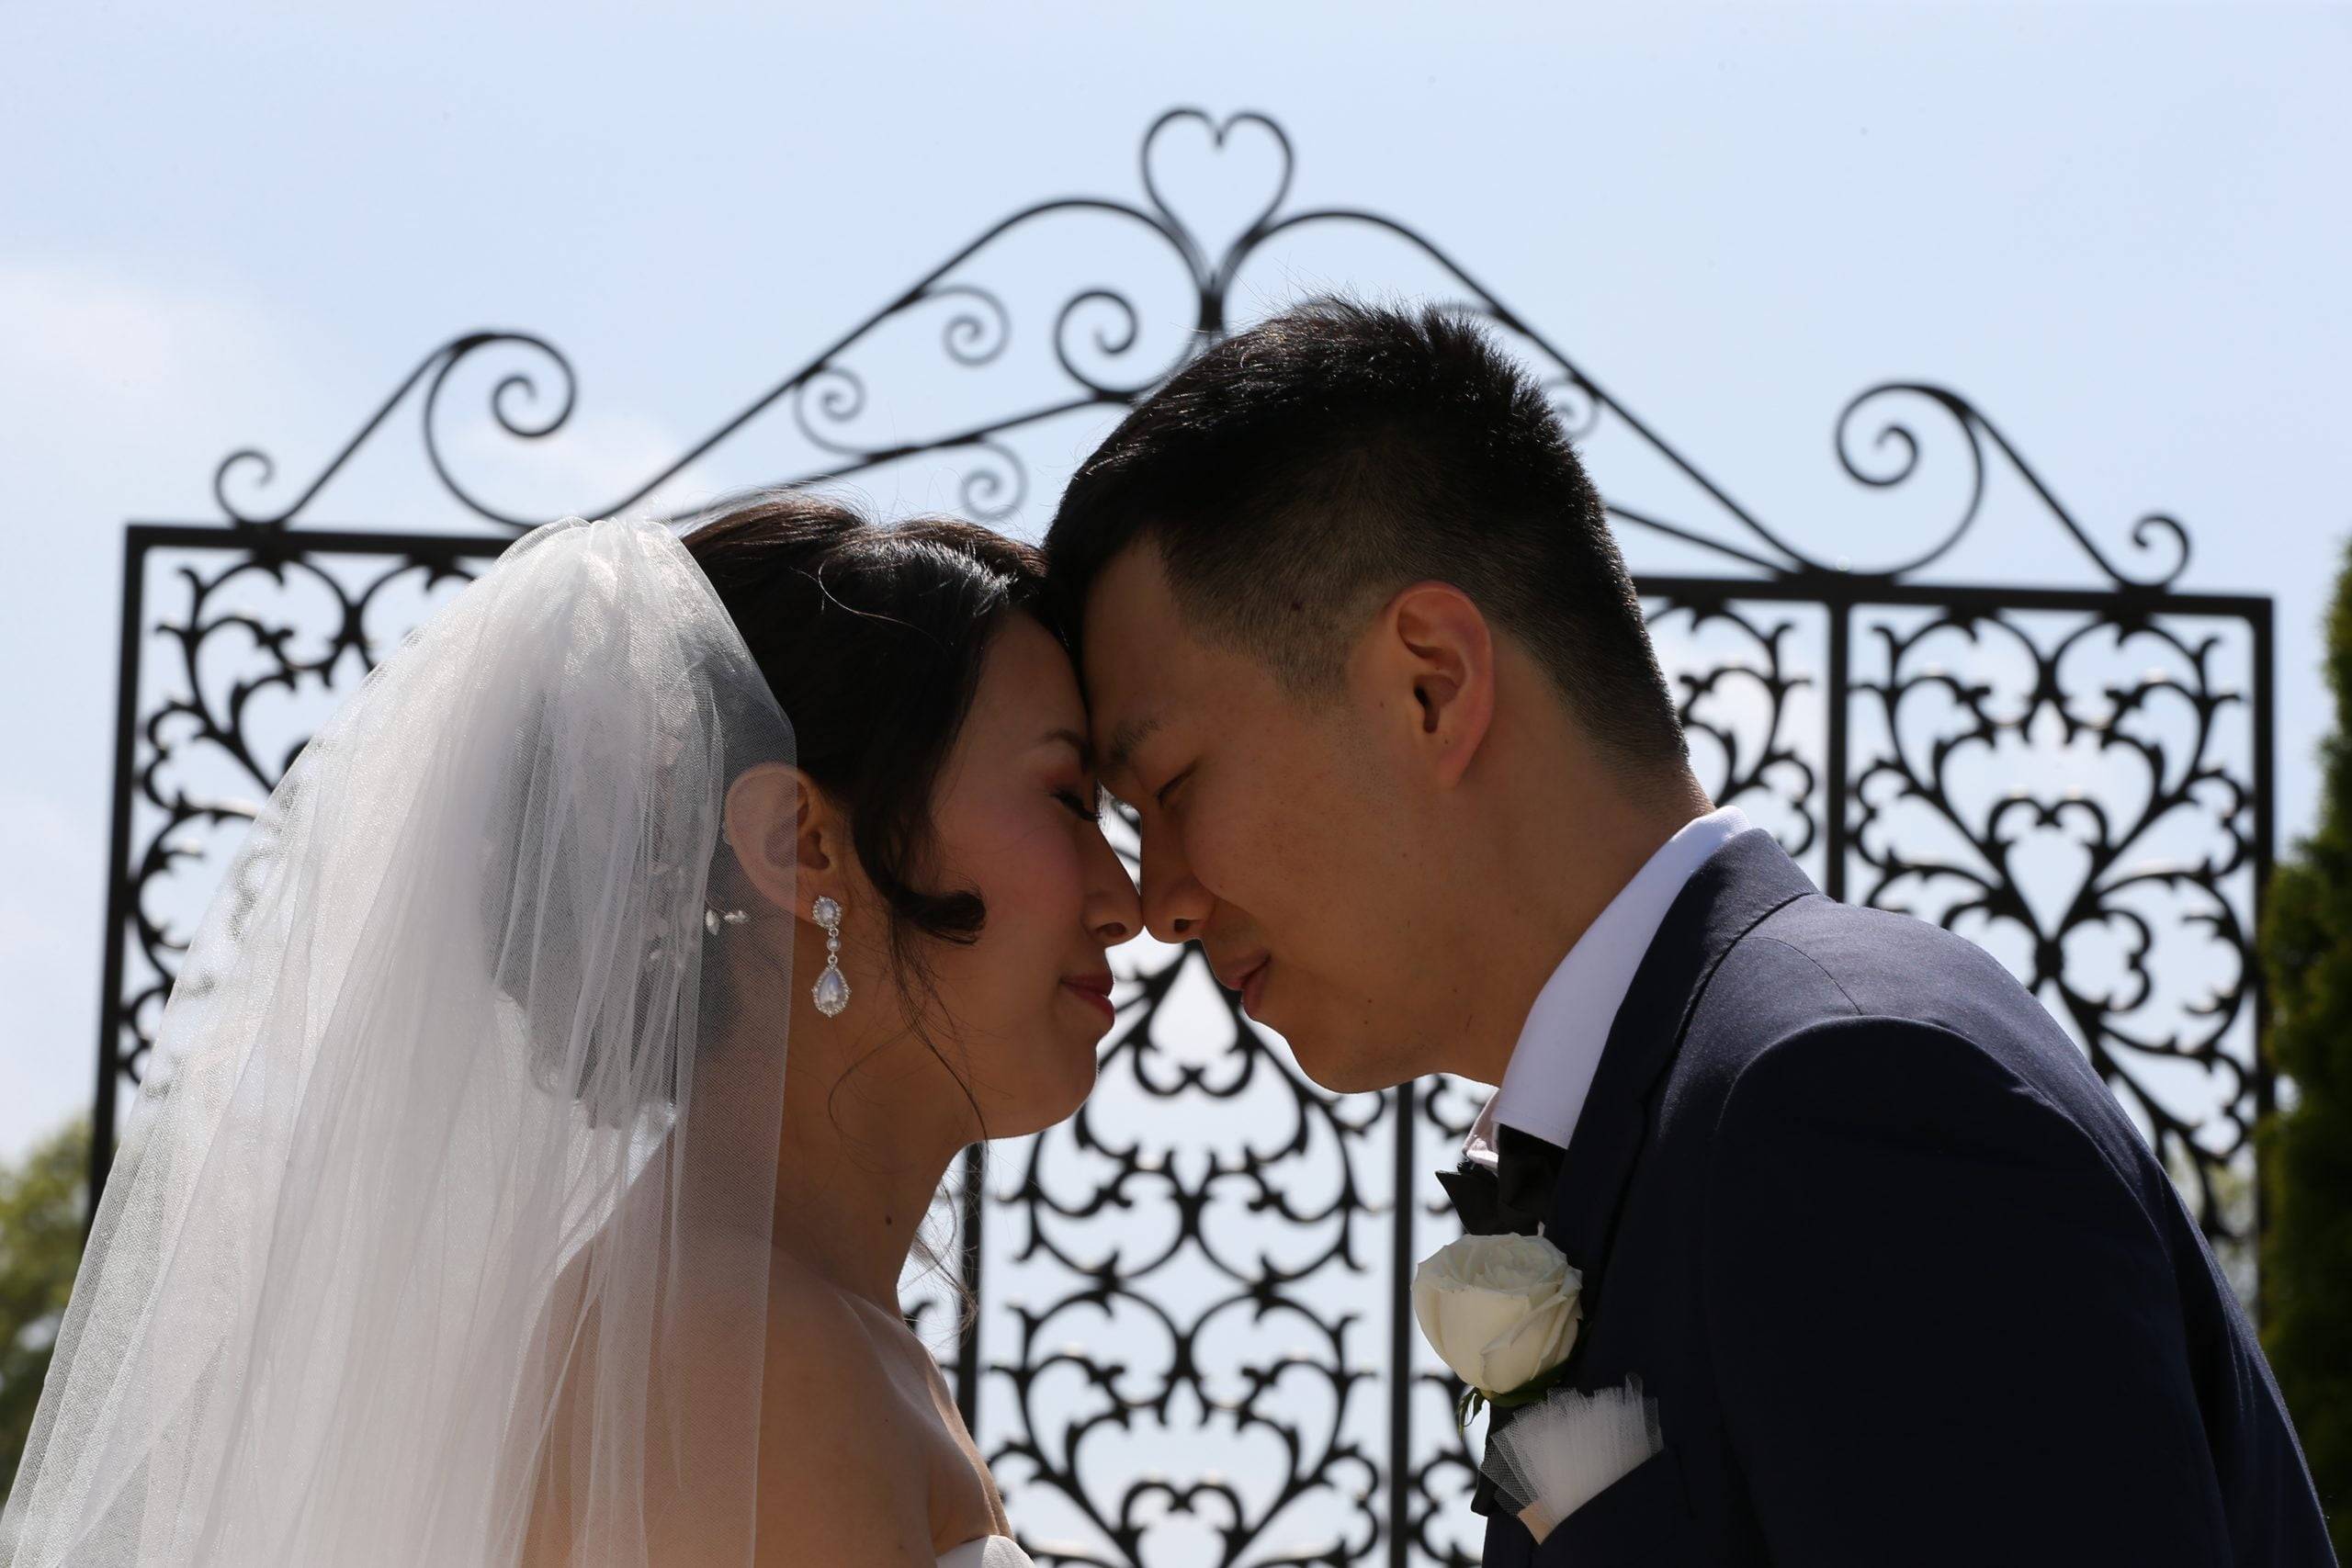 A bride and groom kissing in front of an iron gate.